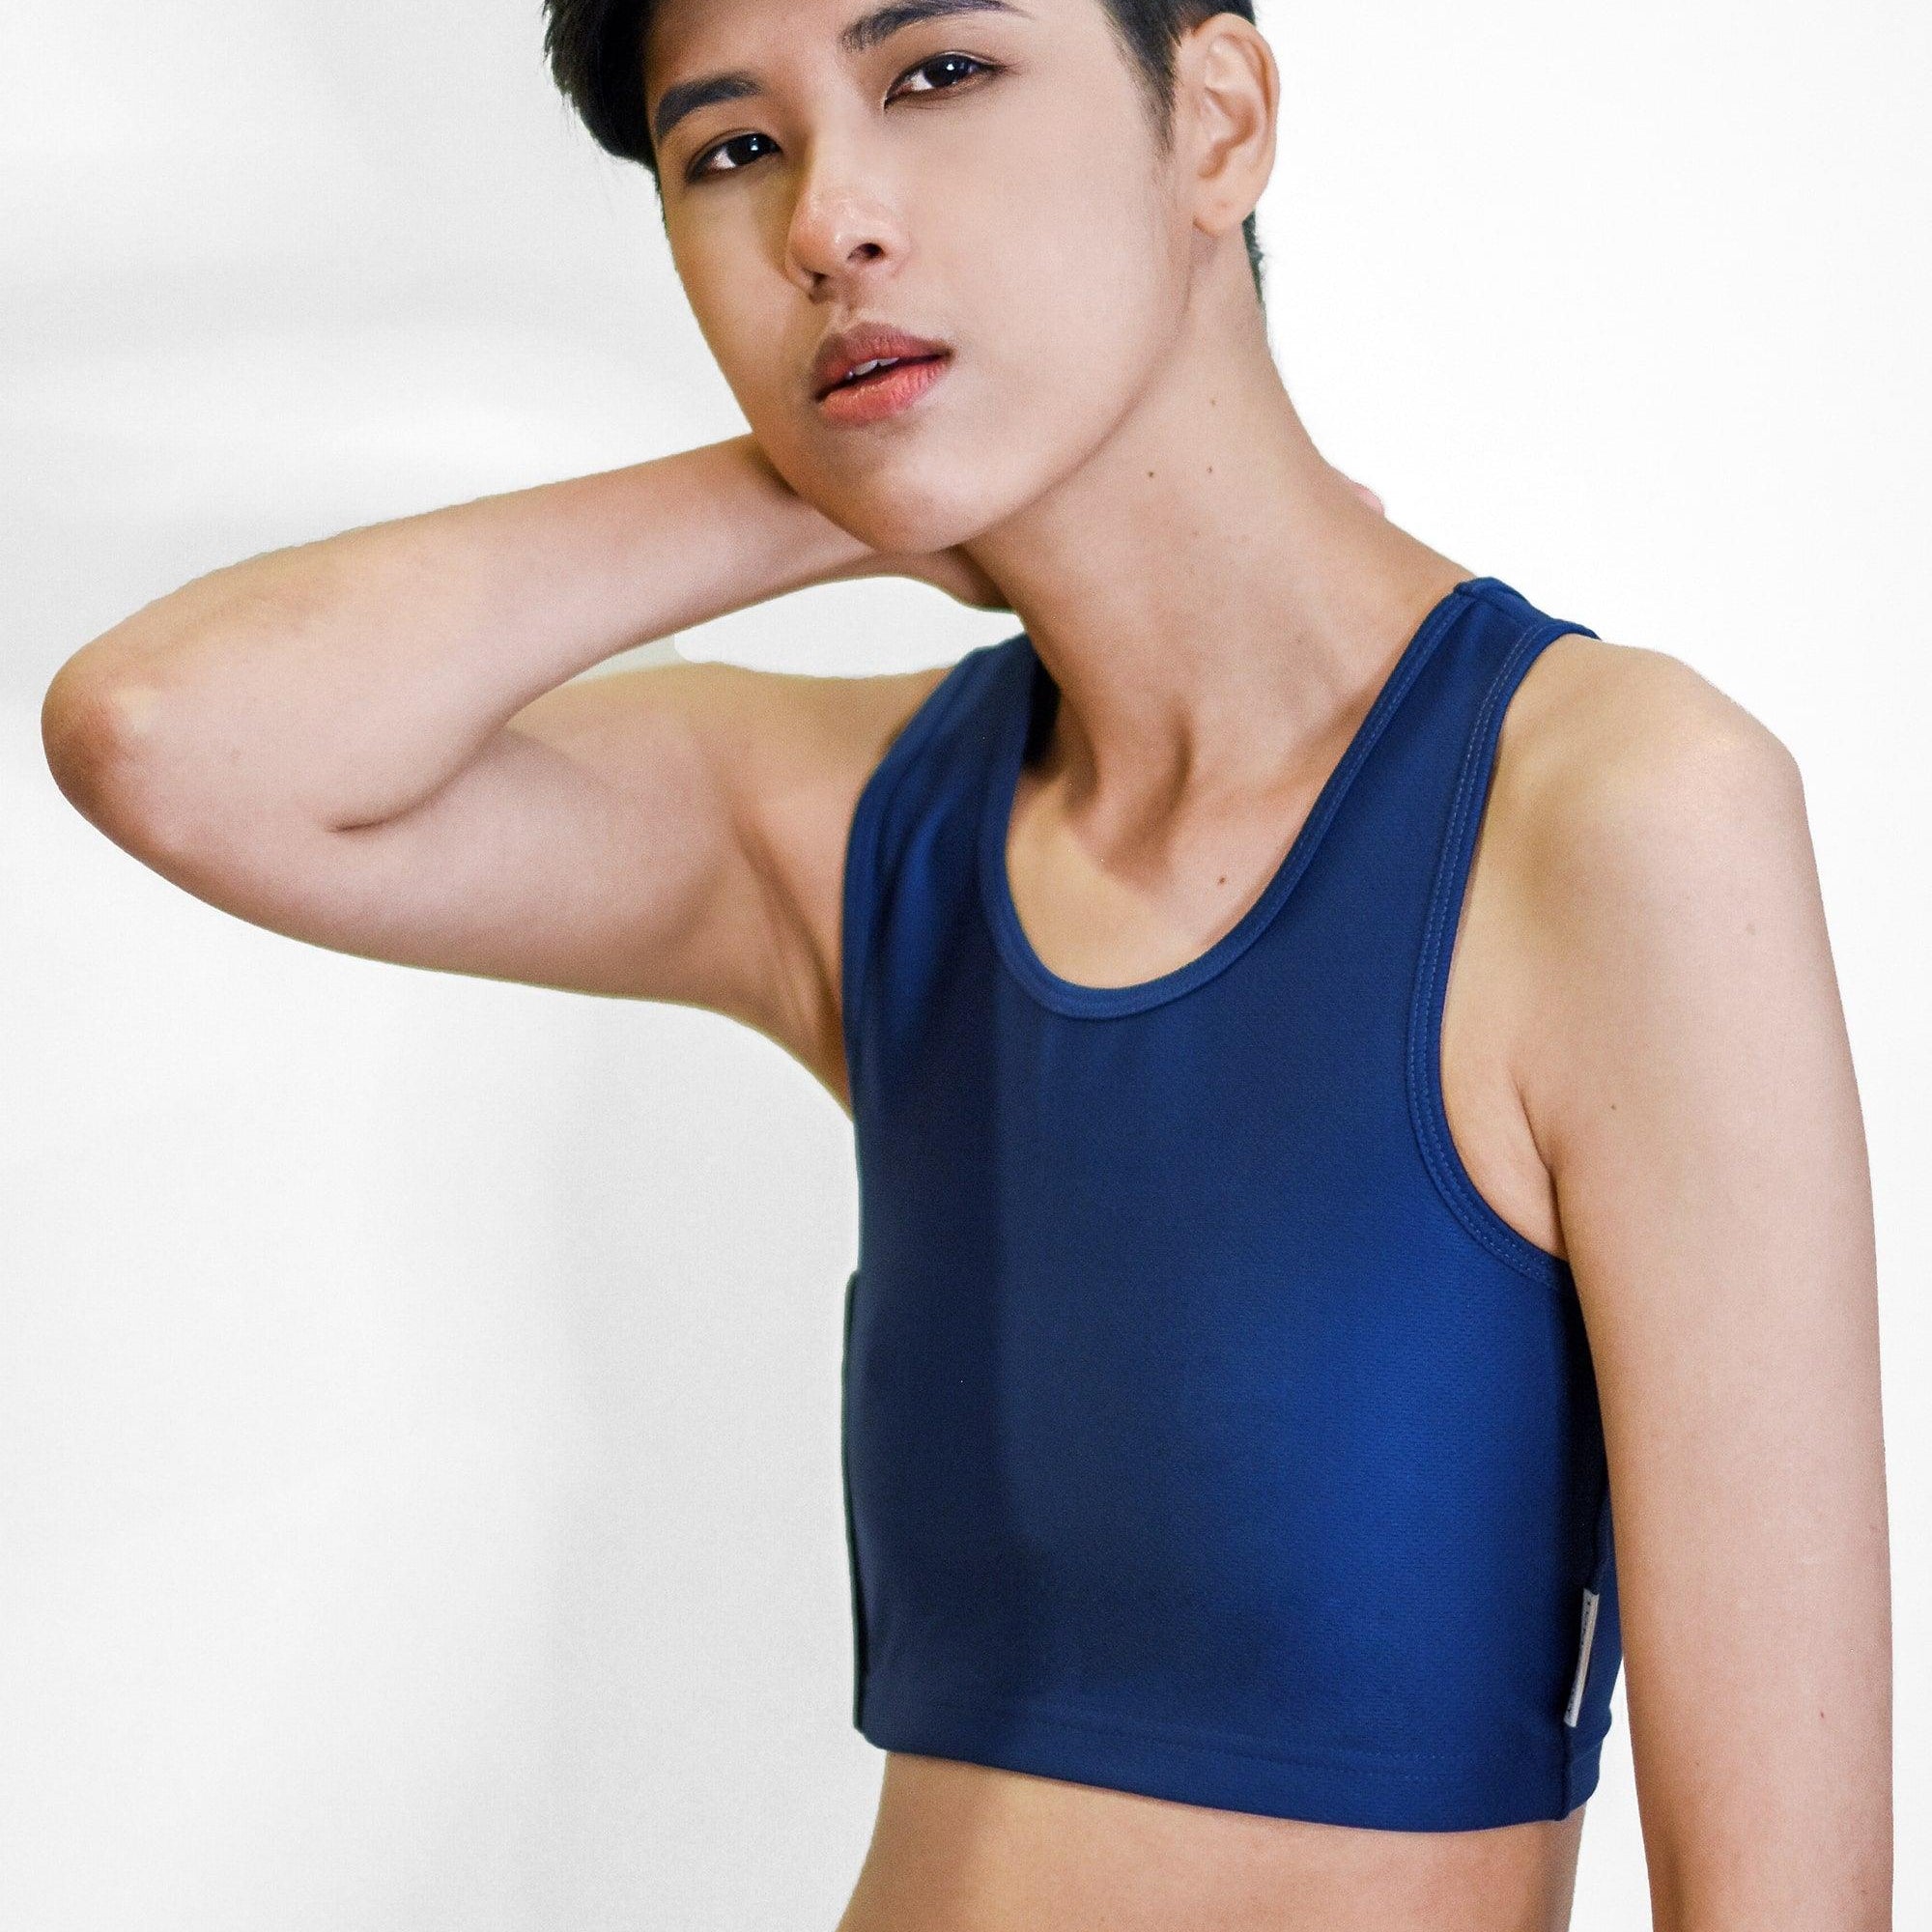 Non-binary Tomboy in a navy color non-bandage TOMSCOUT Chest Binder, part of the TOMSCOUT ACTIVE BINDER collection, showcasing a clearance binder that's affordable yet high quality.